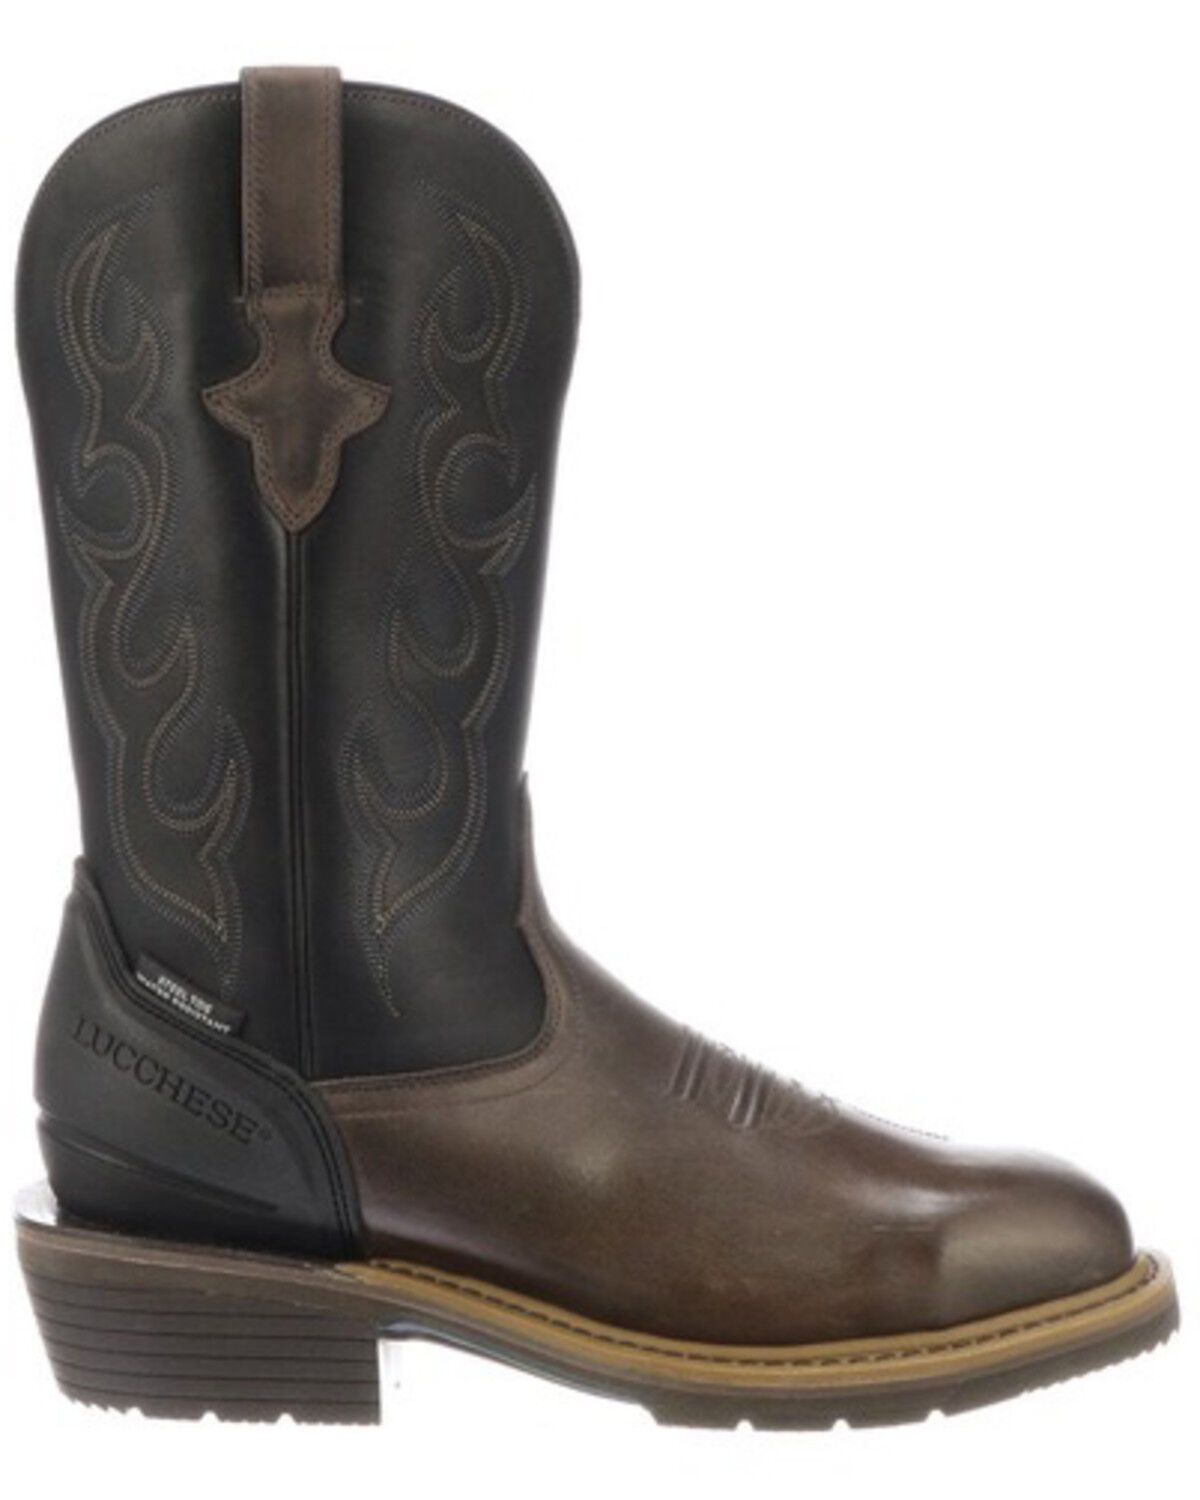 Welted Western Work Boots - Steel Toe 